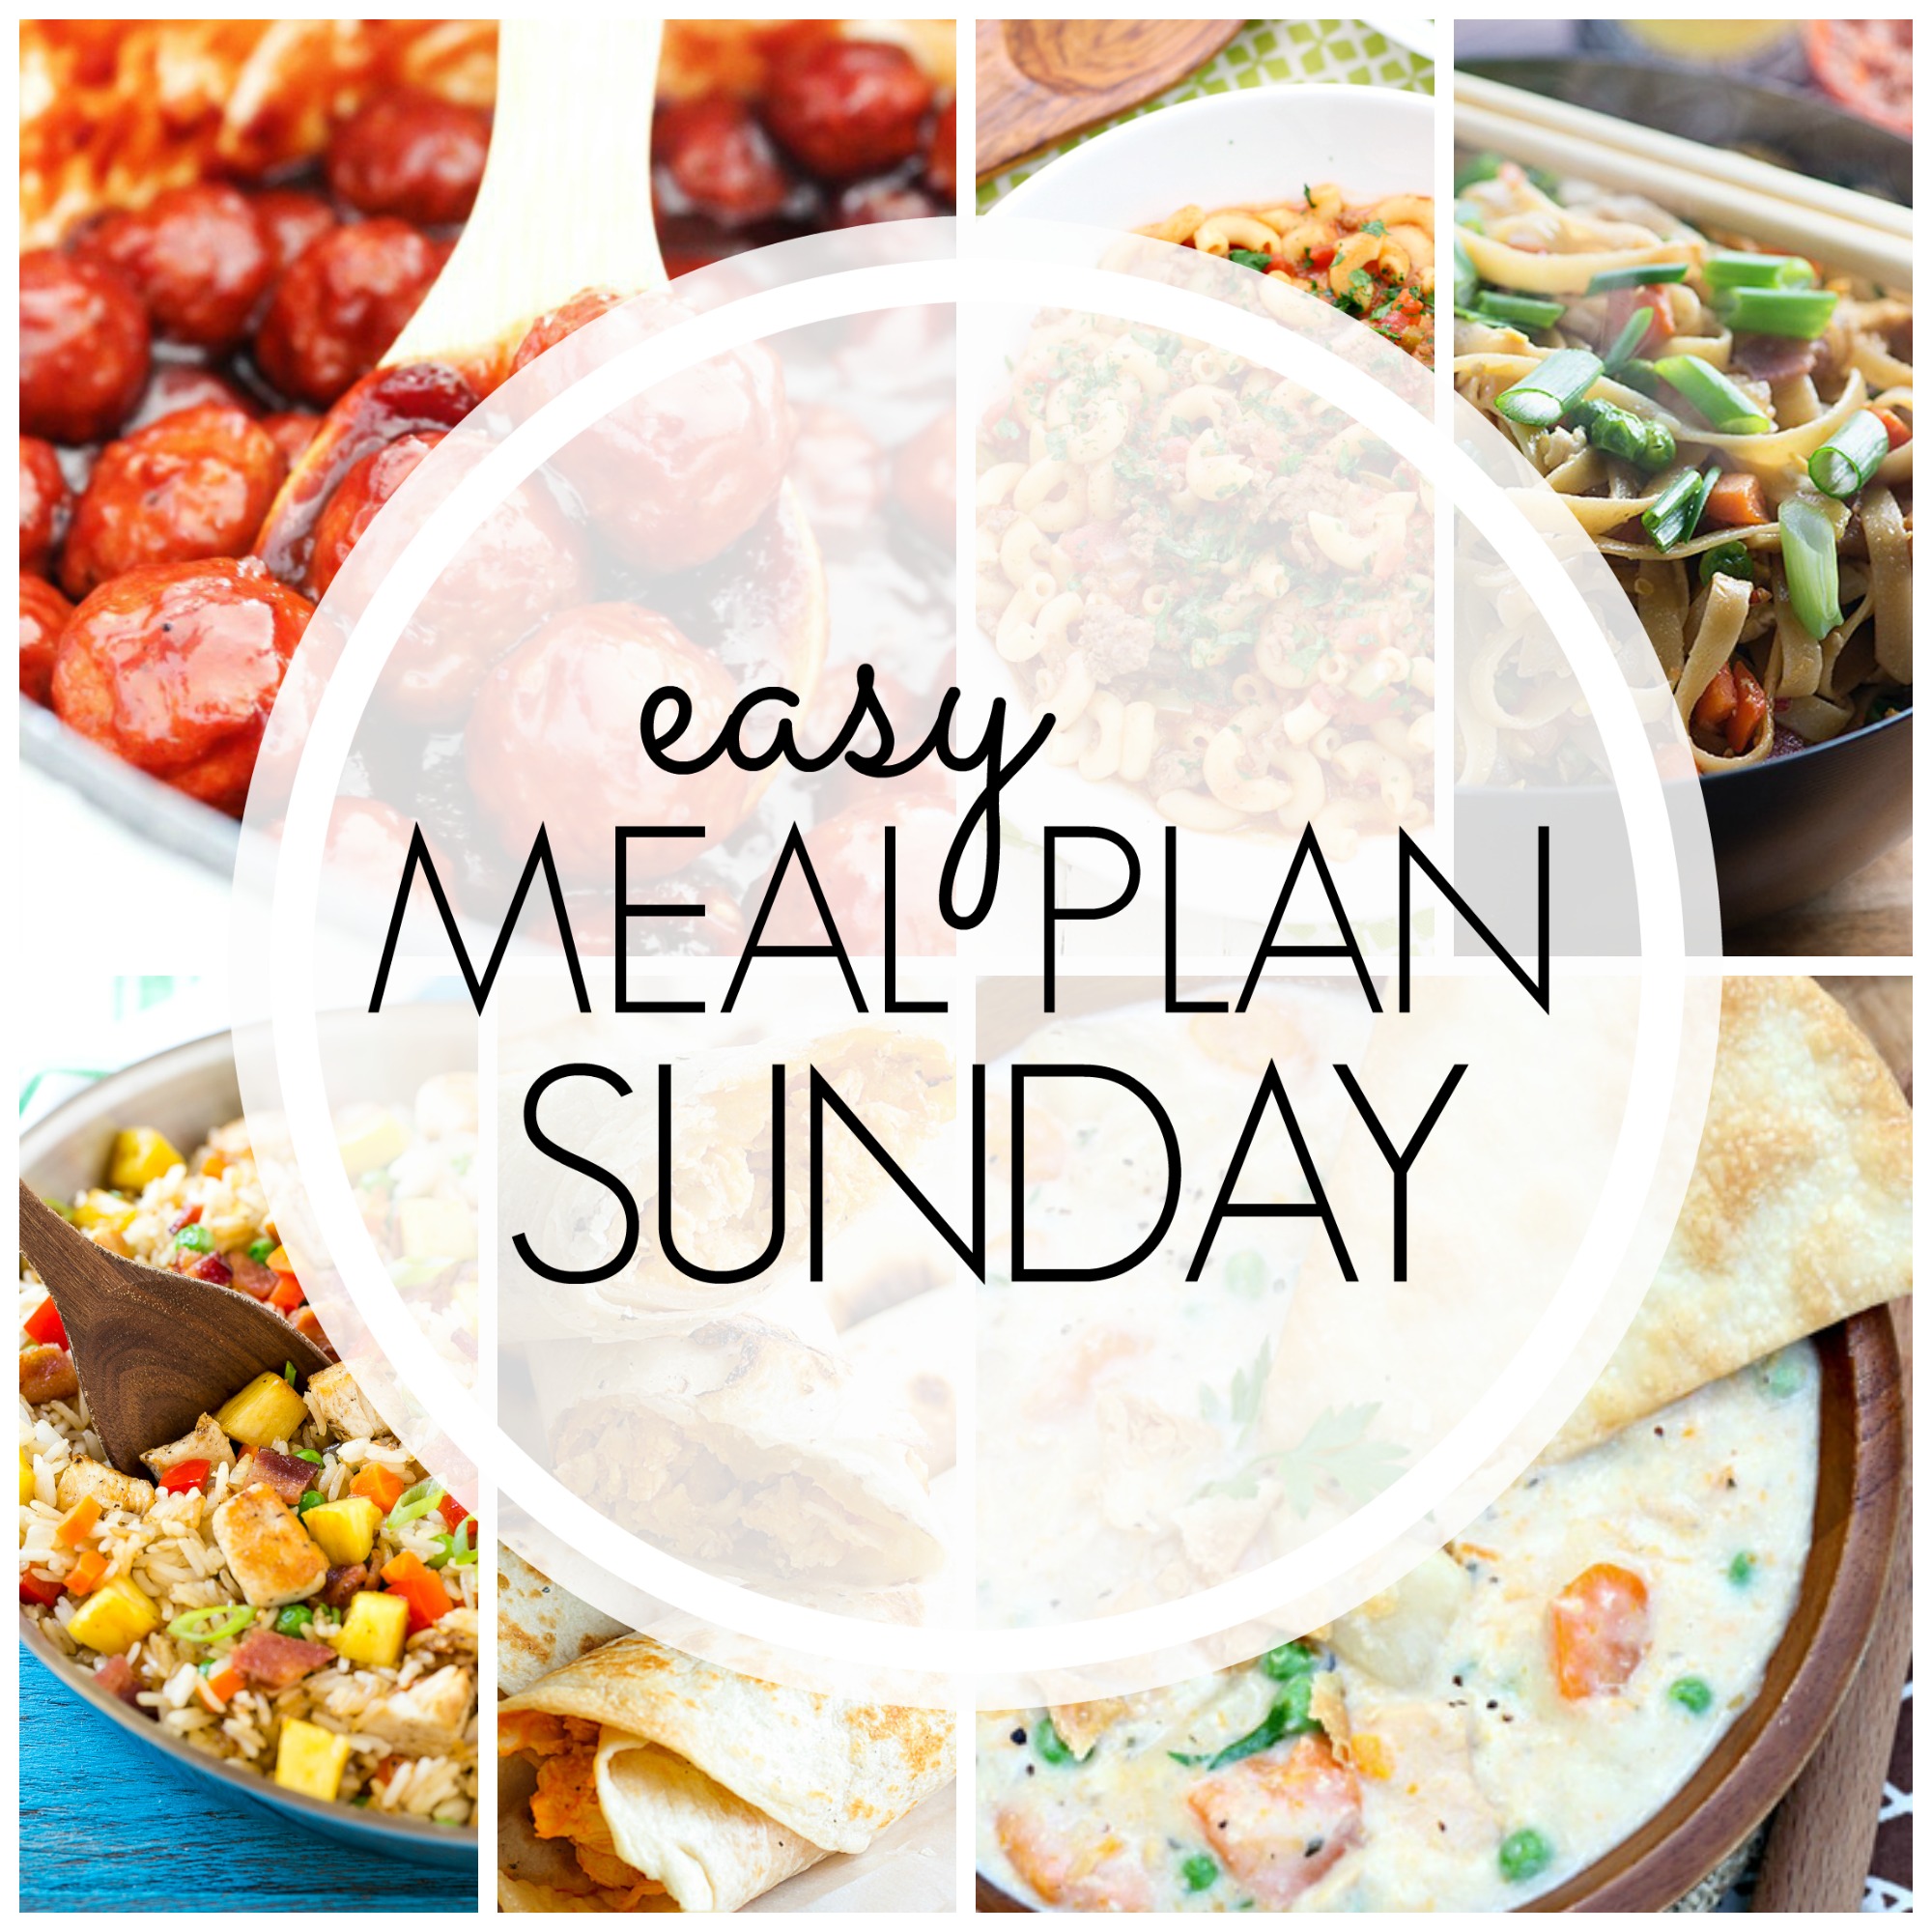 Easy Meal Plan Sunday #73